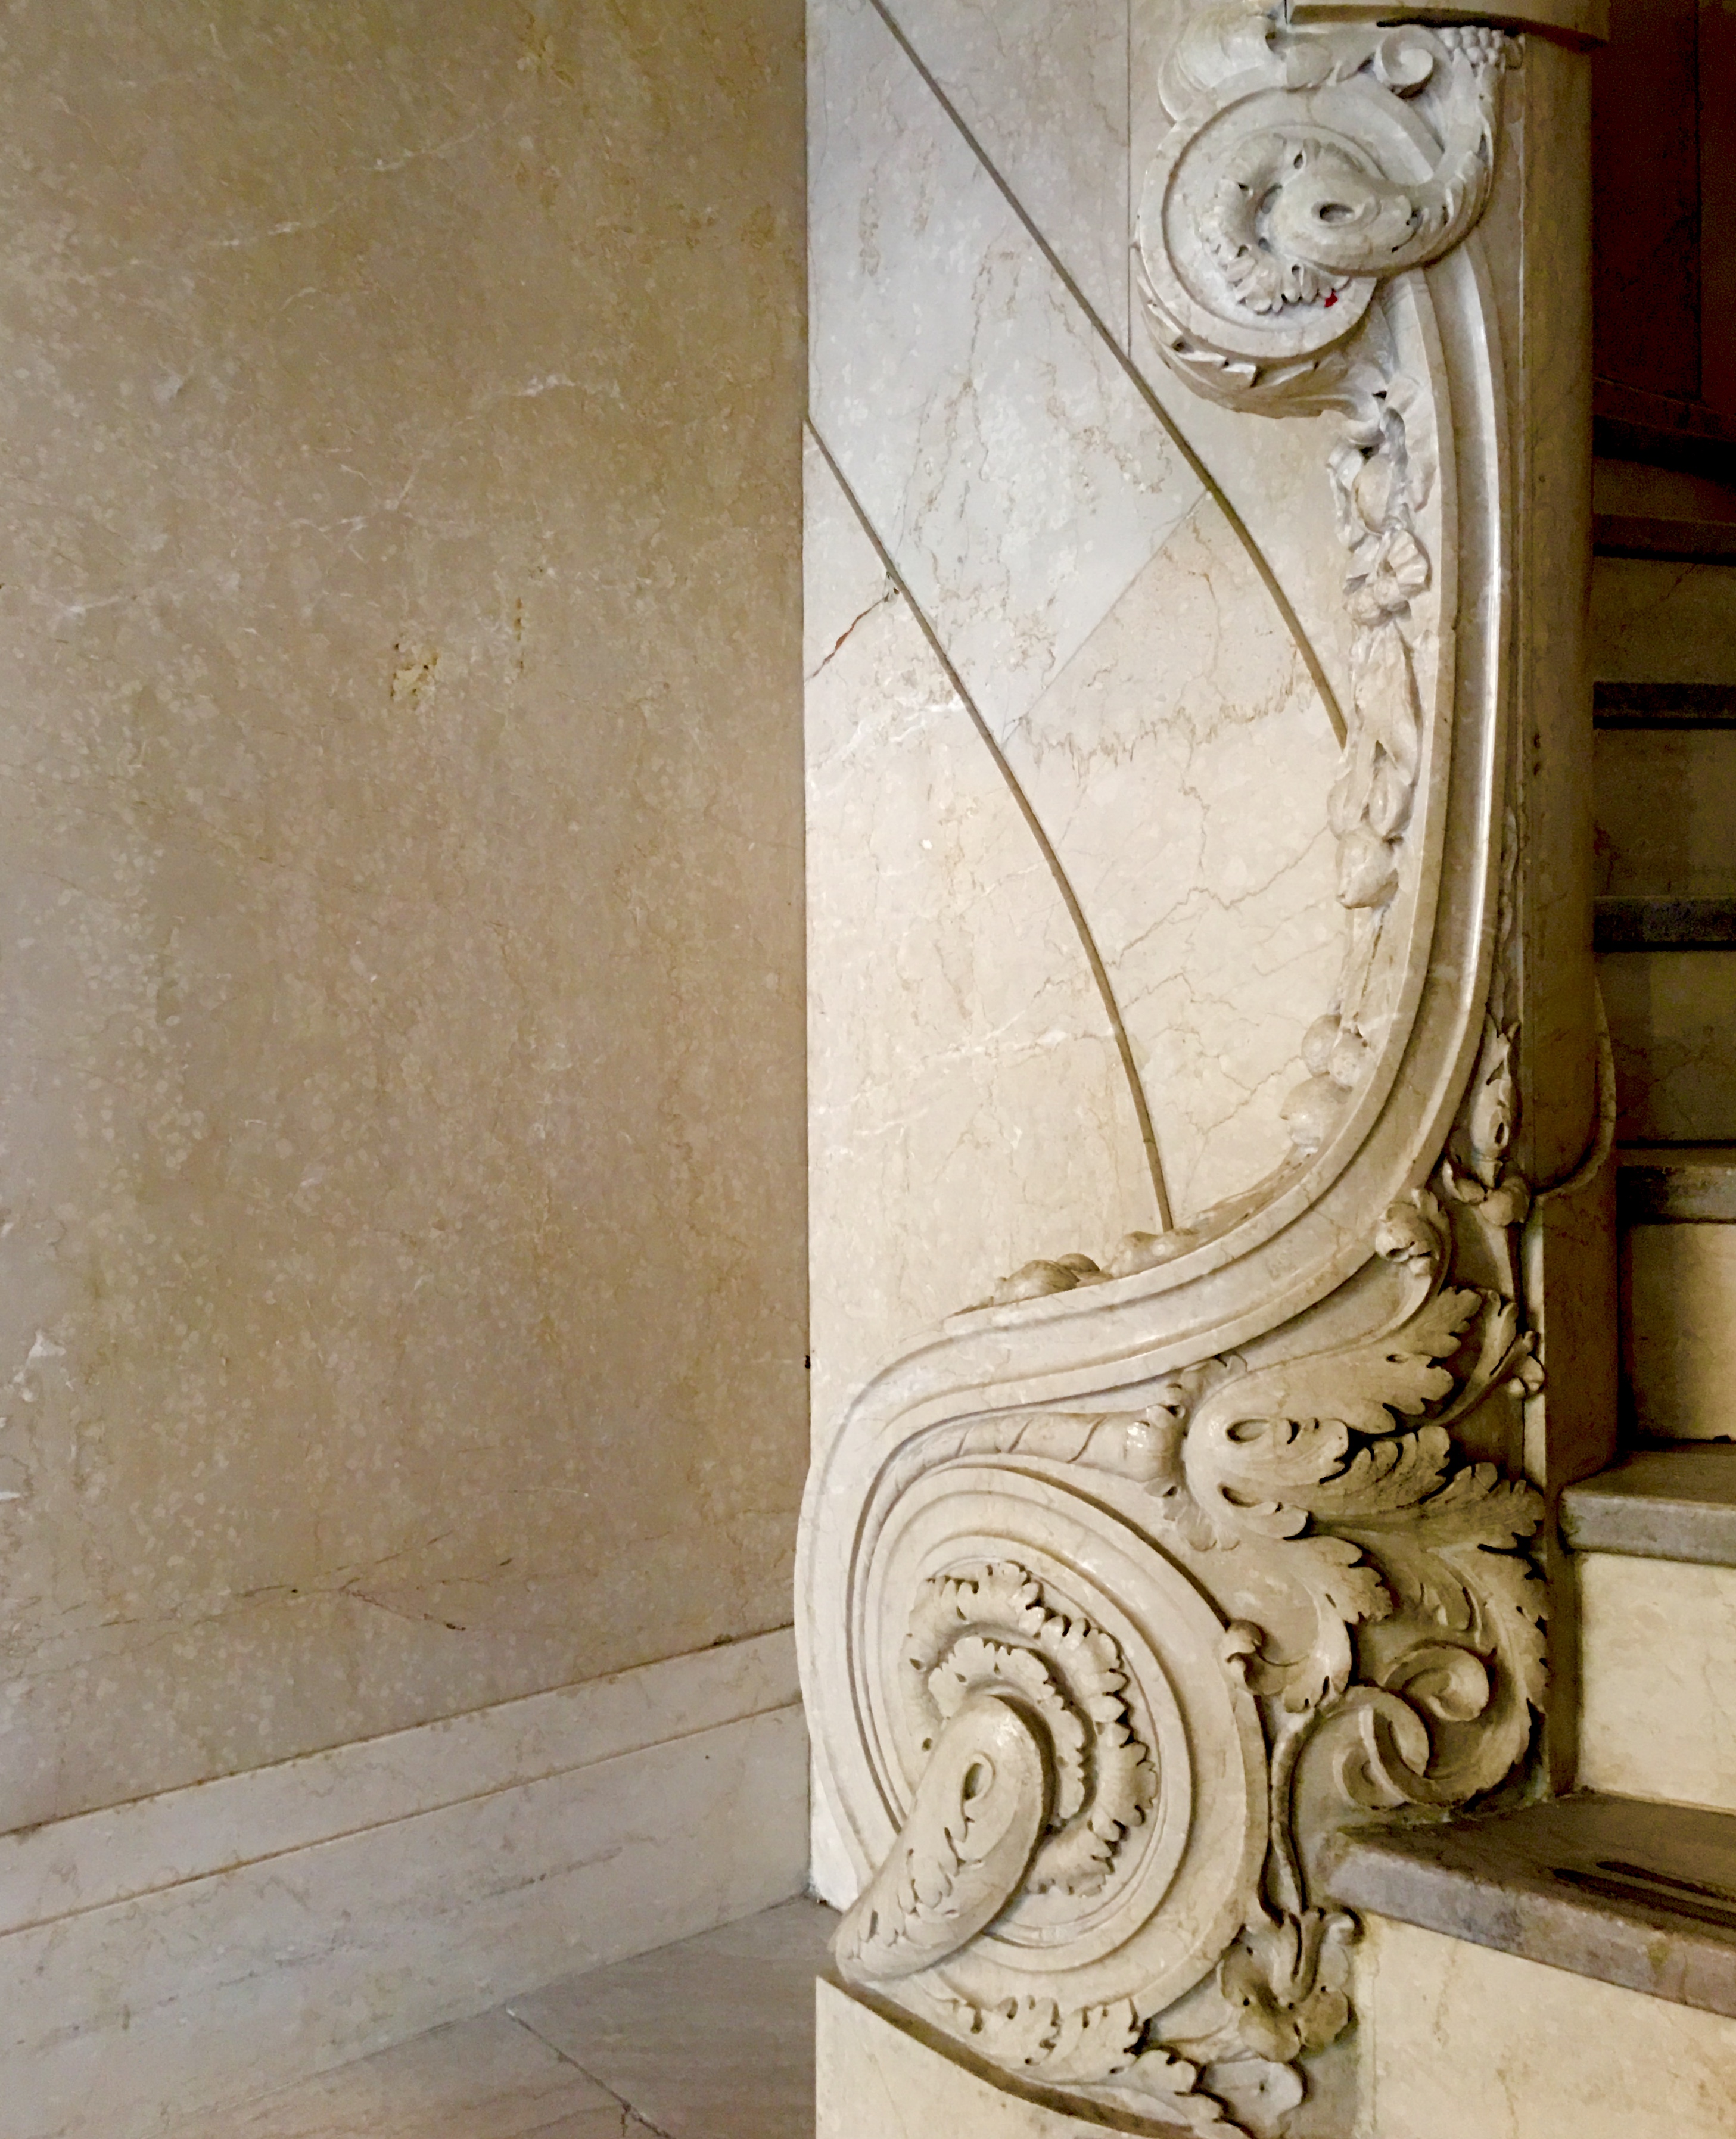 This marvelous marble staircase is inside the Hotel Bossert’s entrance. Eagle photo by Lore Croghan